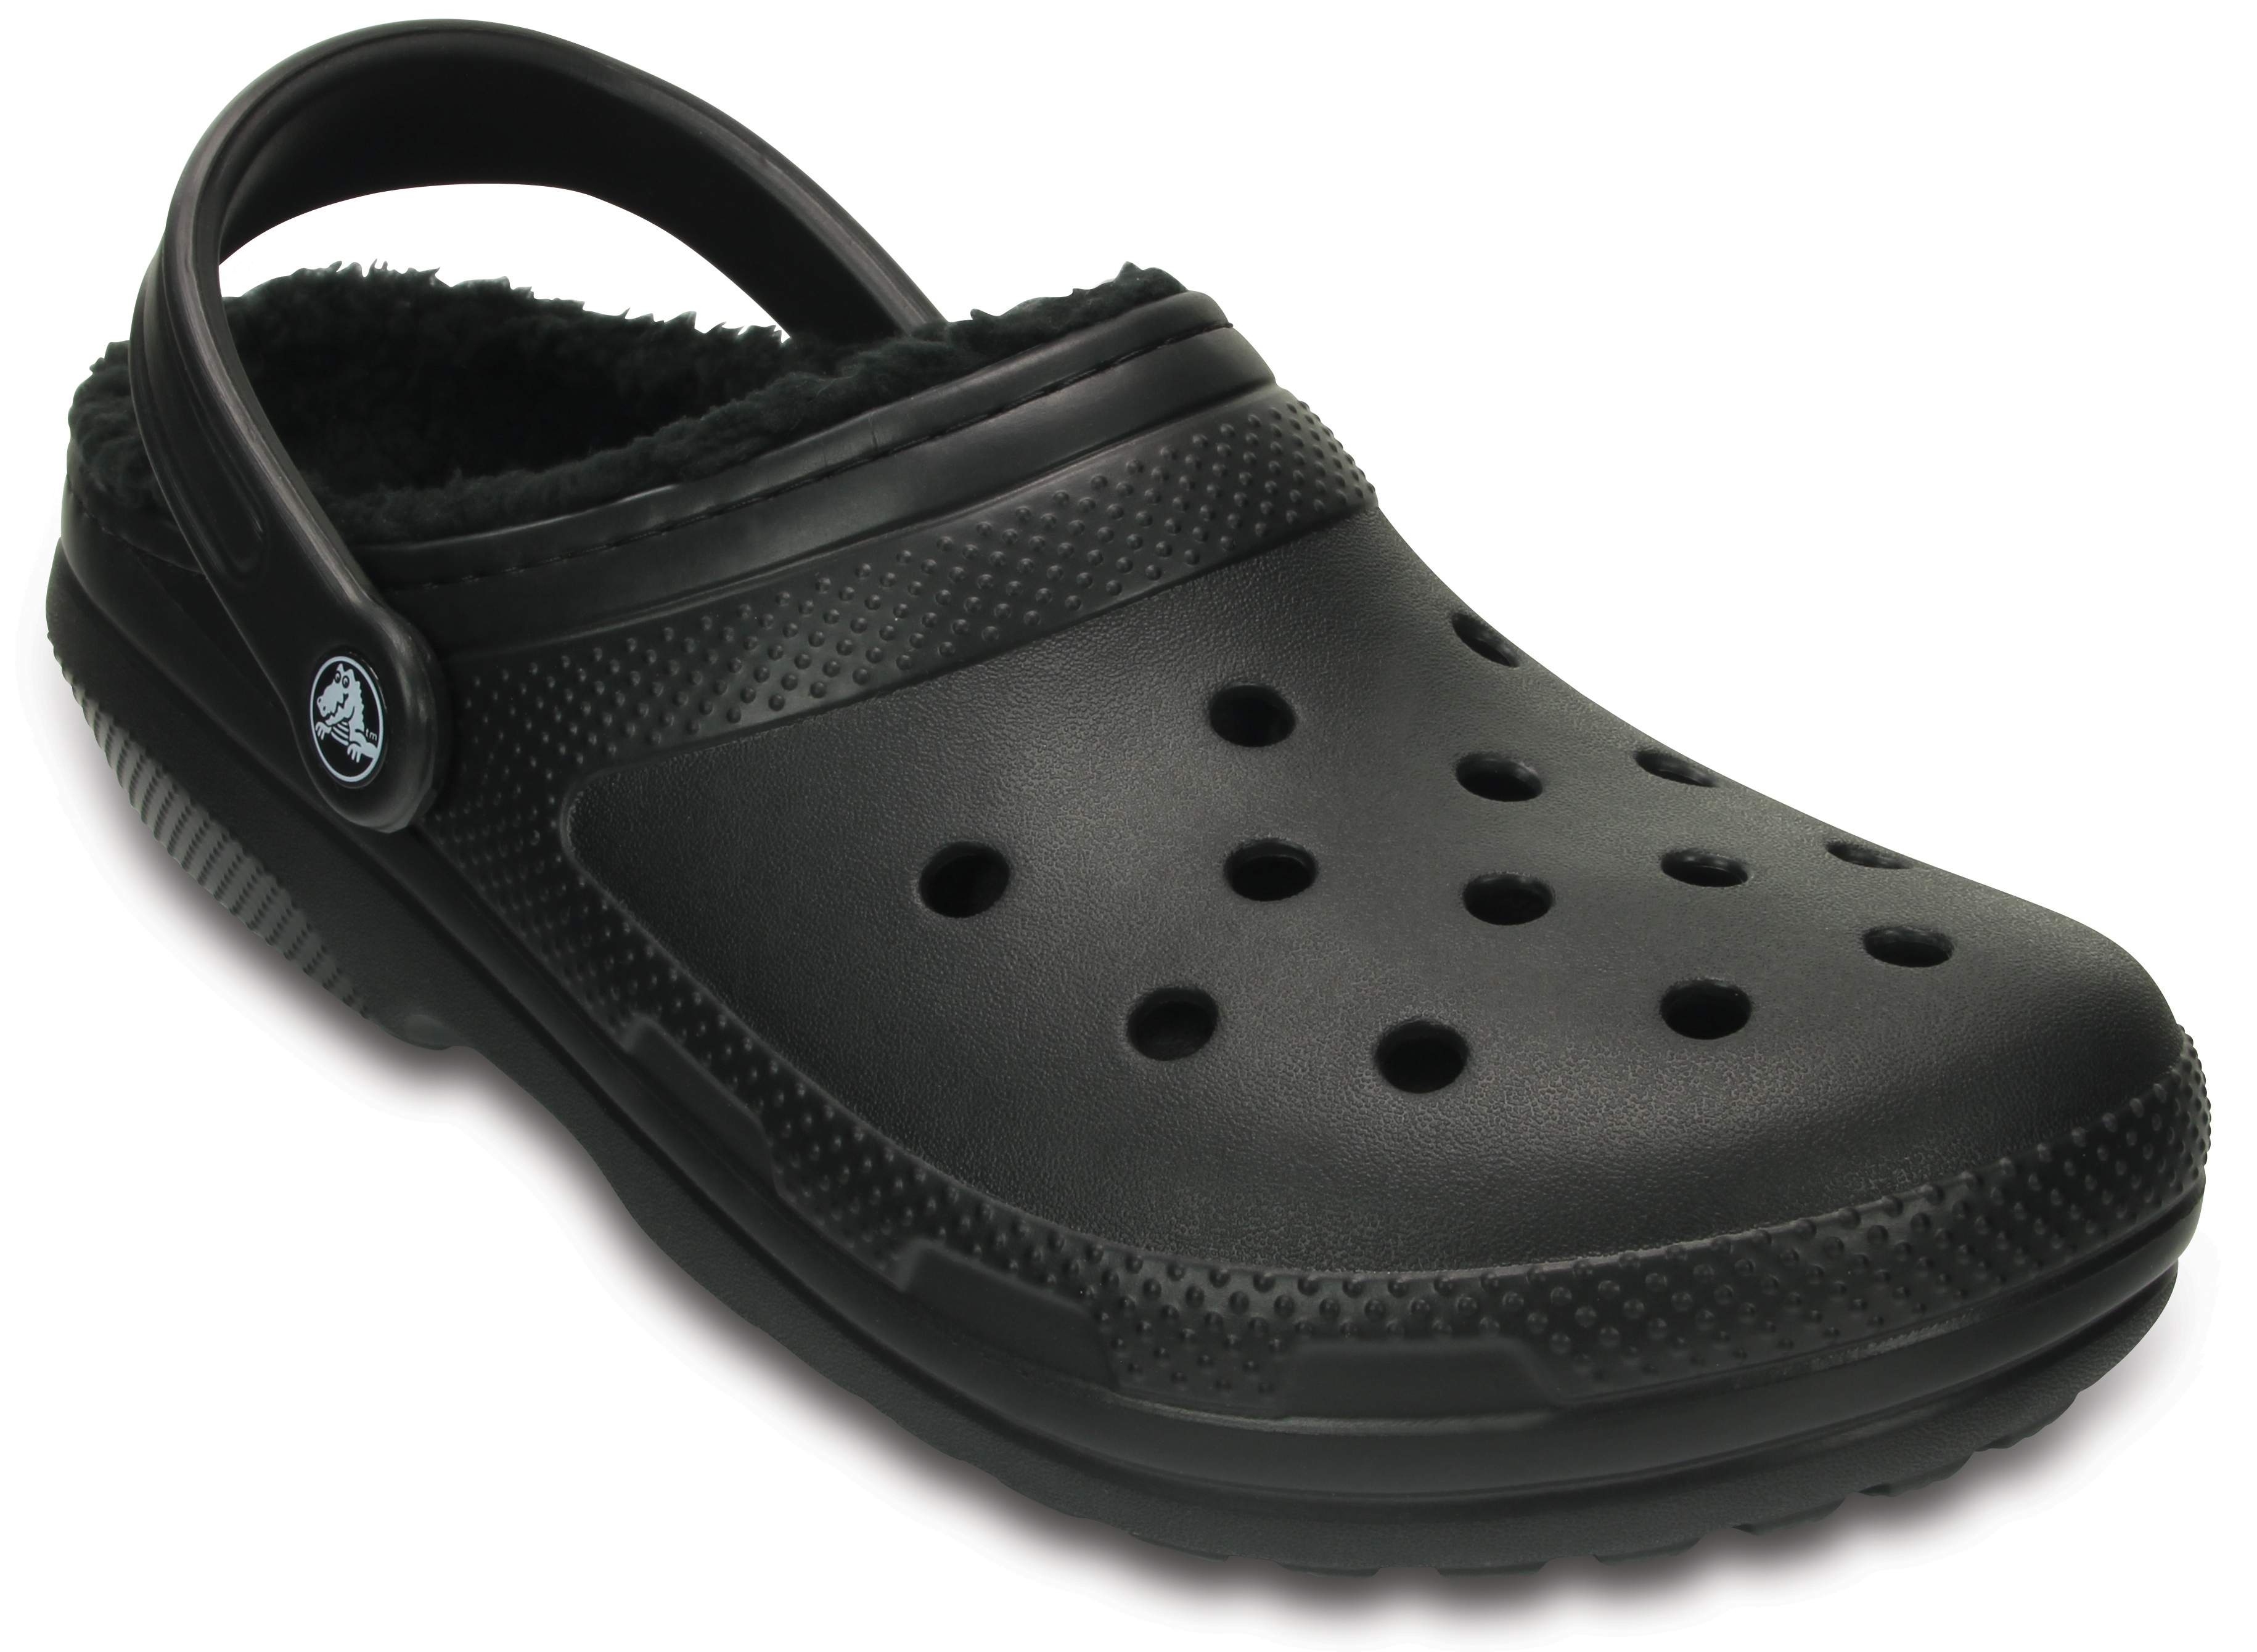 crocs lined slippers